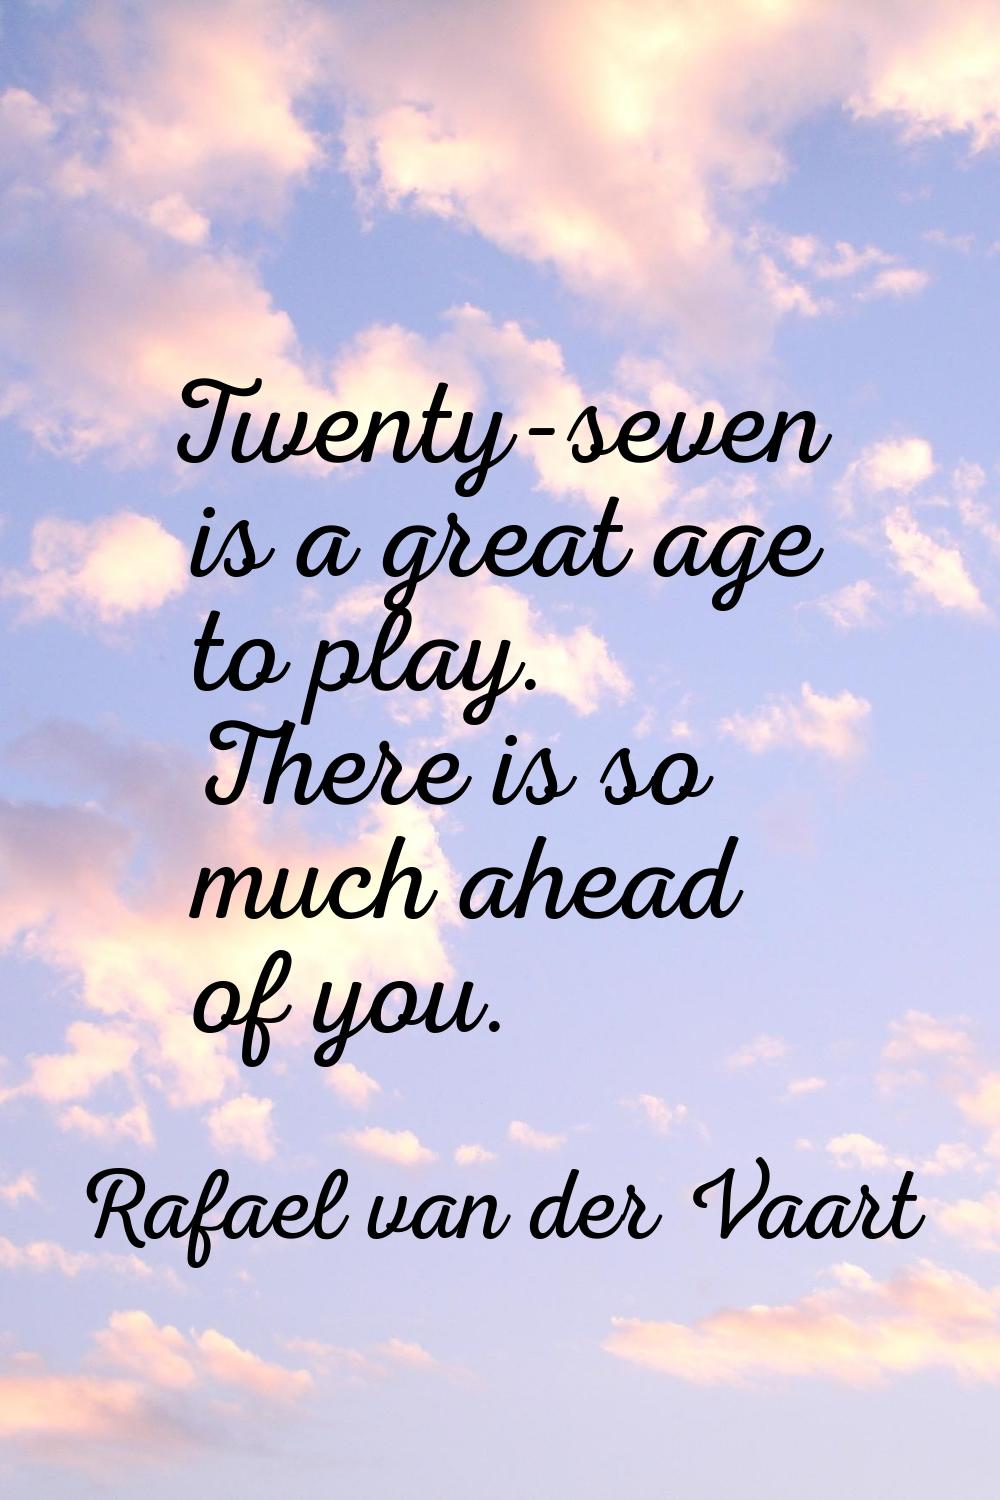 Twenty-seven is a great age to play. There is so much ahead of you.